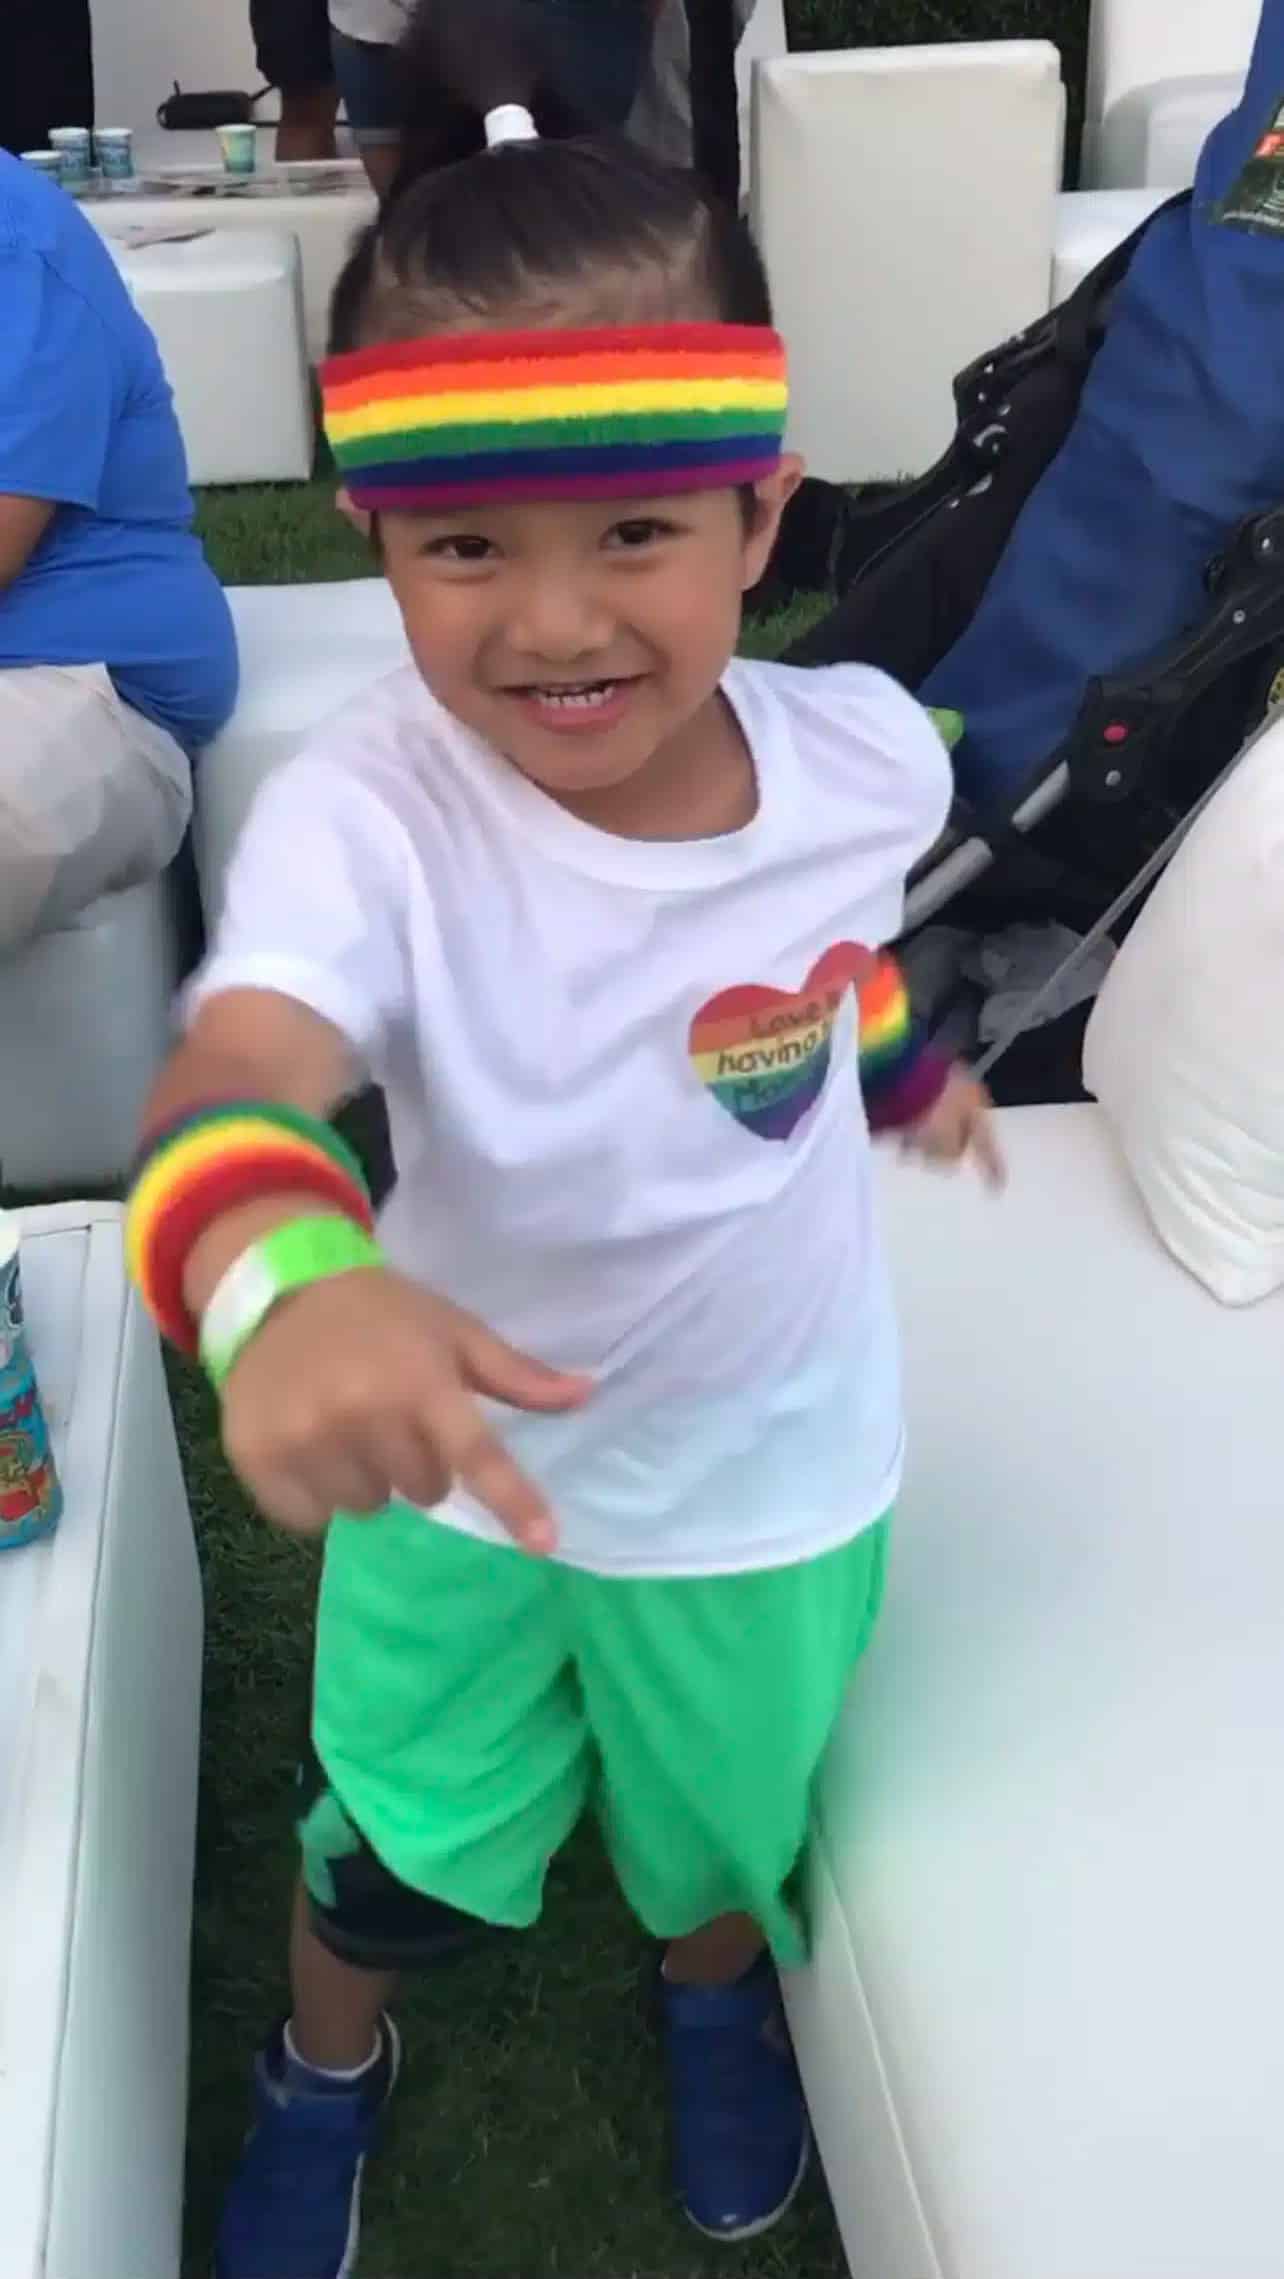 In 2019 we went to our first Rainbow on the Green with our then 5 year old son. When the music started – the rhythm got to him and he just started to dance not caring who was watching. We had such a wonderful time. We loved that the event was entertaining and family friendly! — Christine Rudzinski Raby